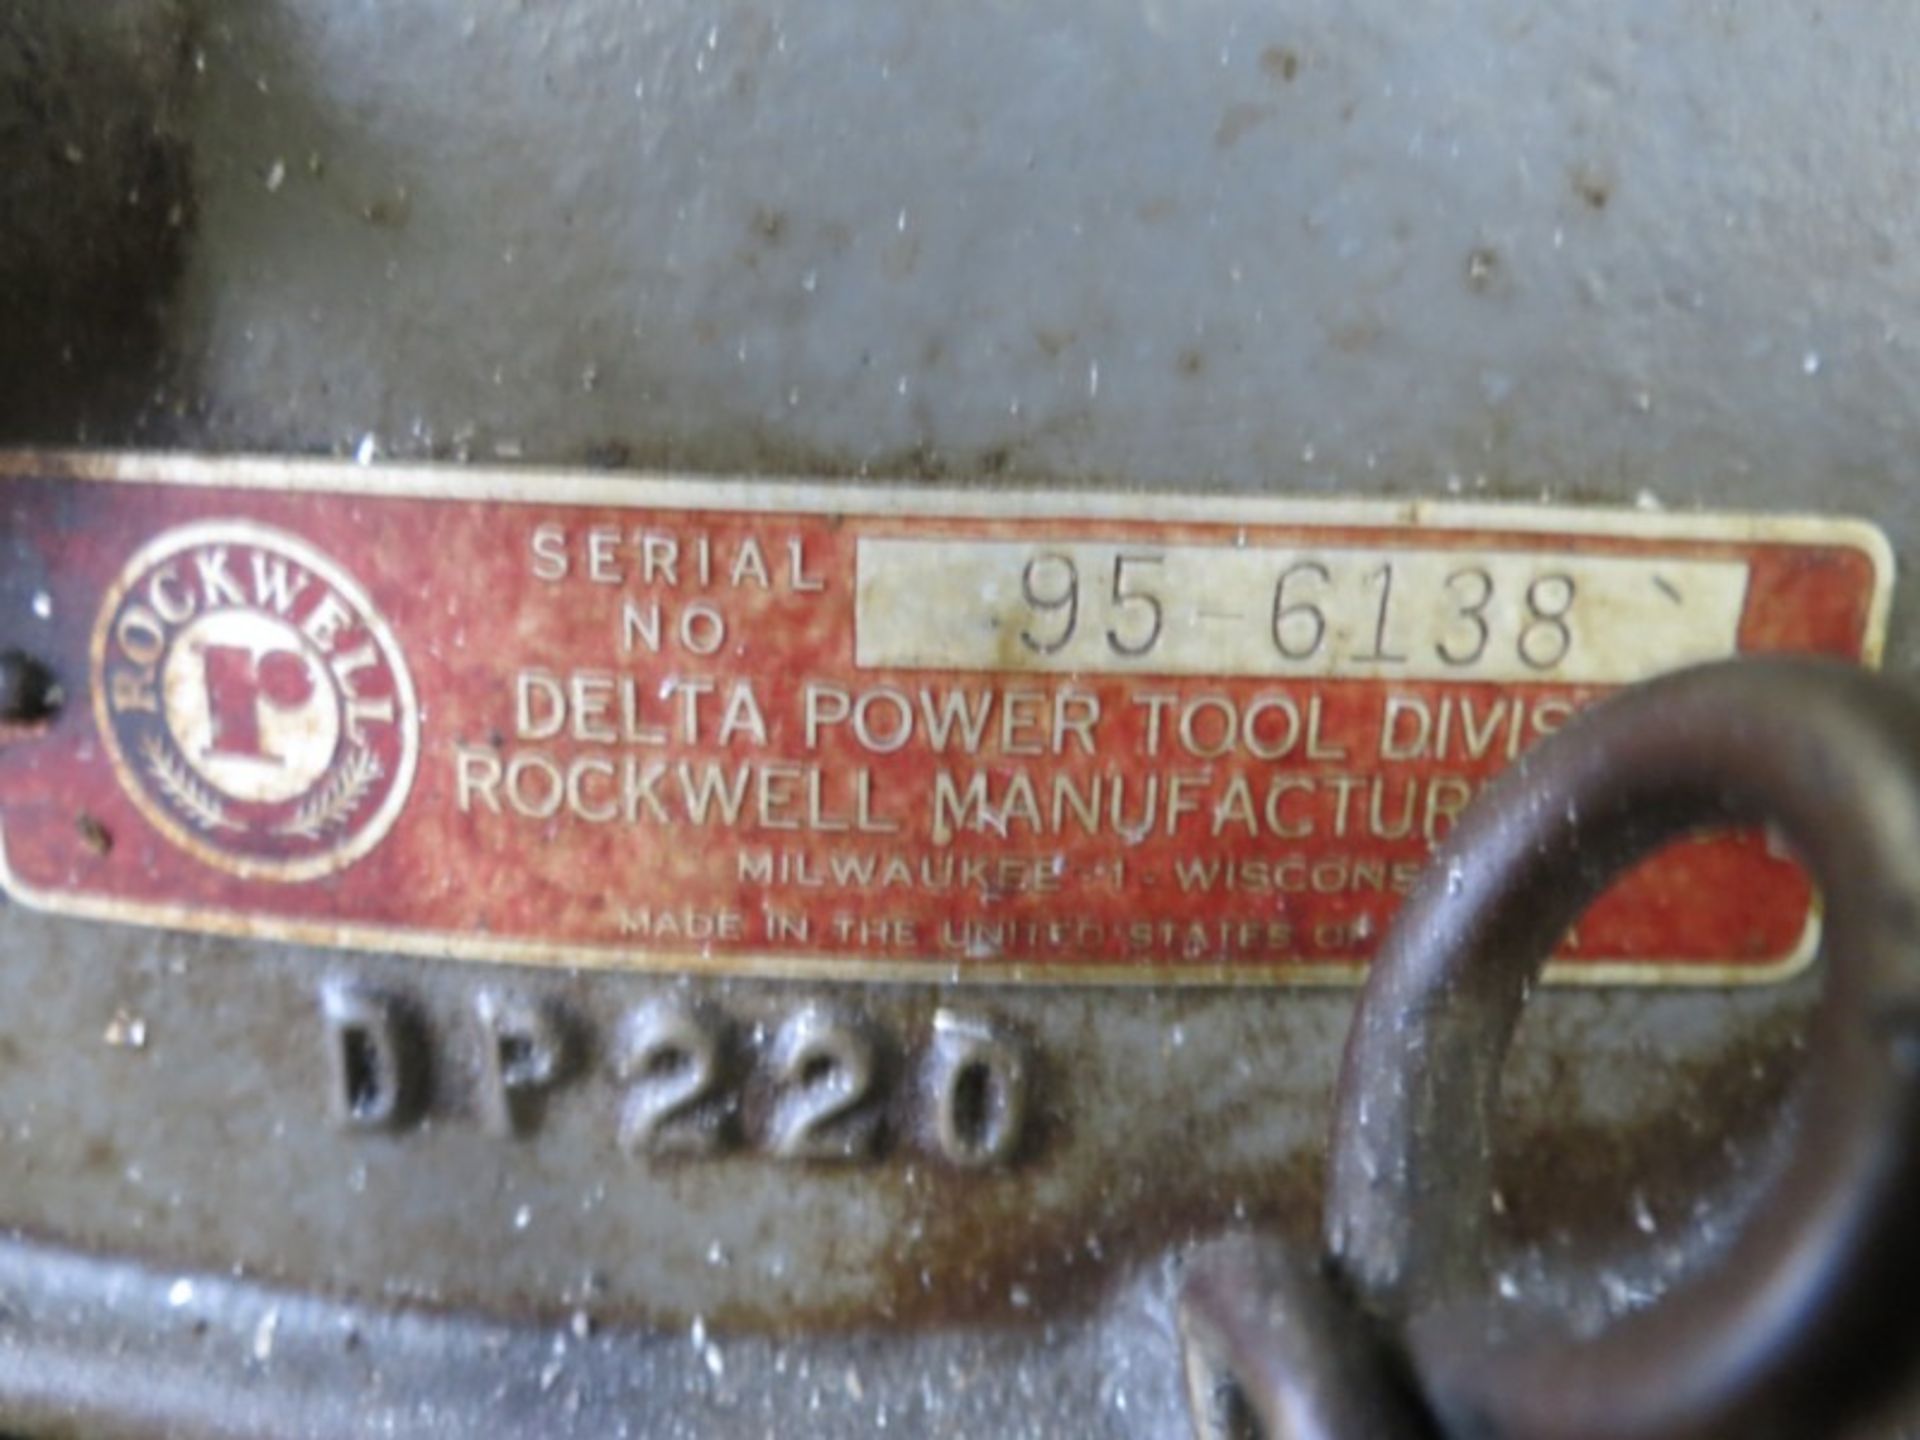 Rockwell Delta Floor Type Drill Press, s/n 95-6138 - Image 3 of 3